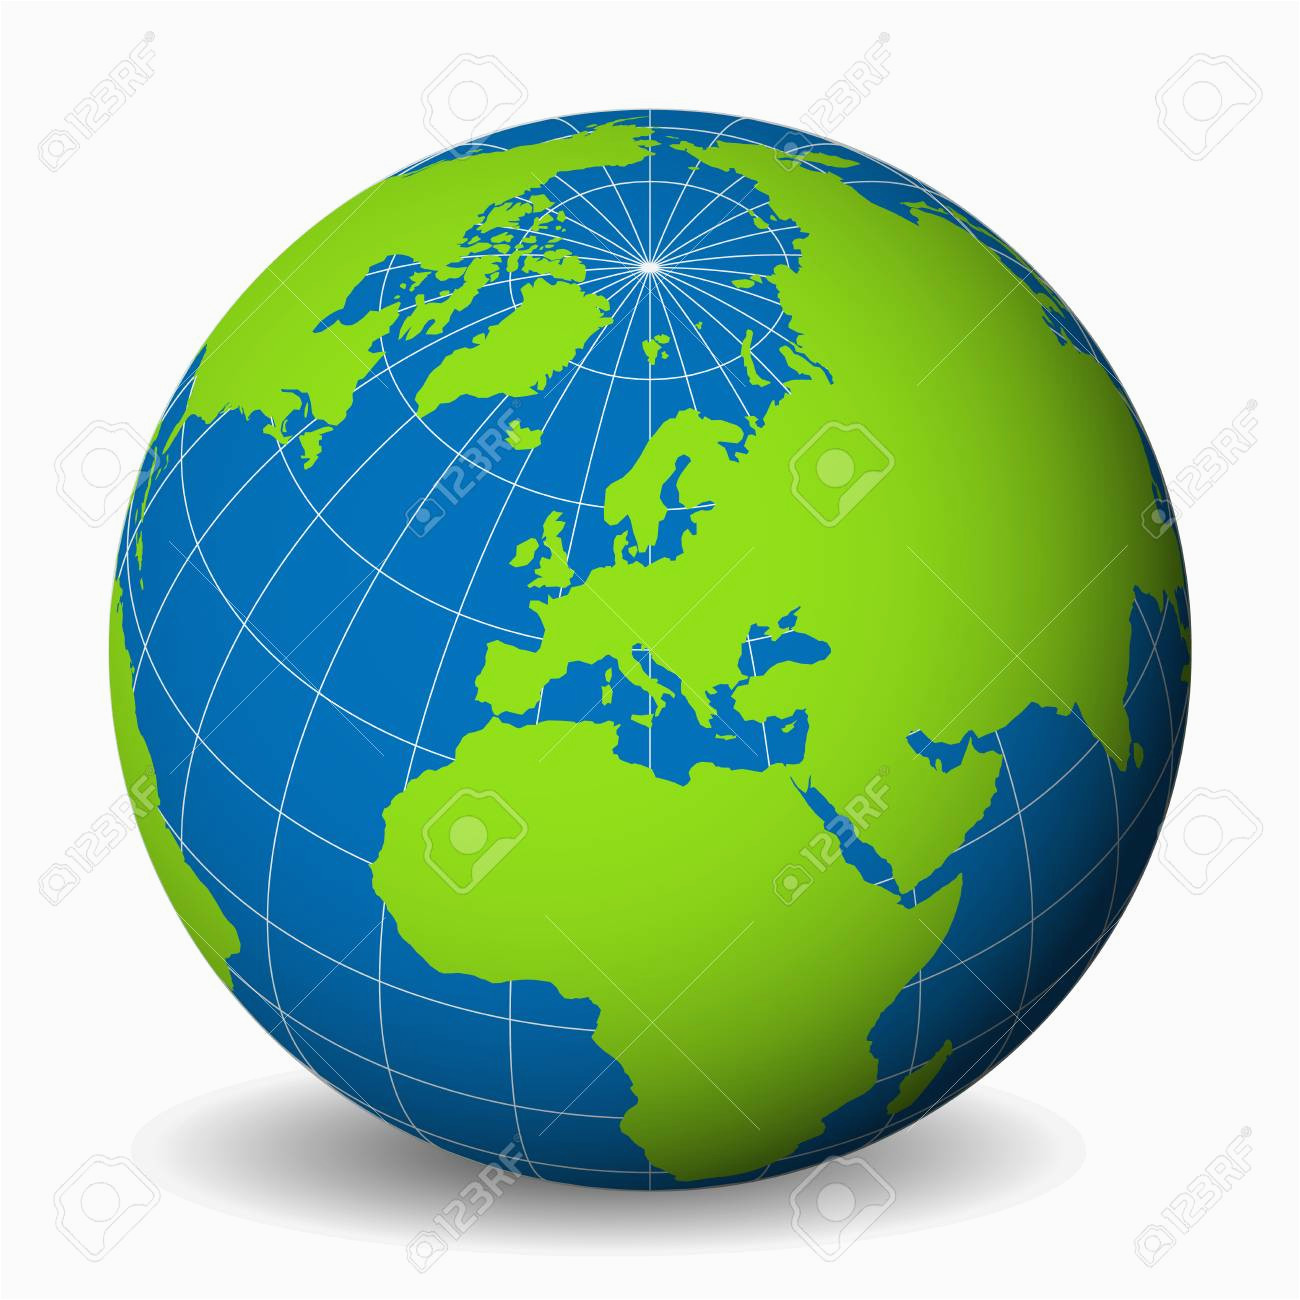 earth globe with green world map and blue seas and oceans focused